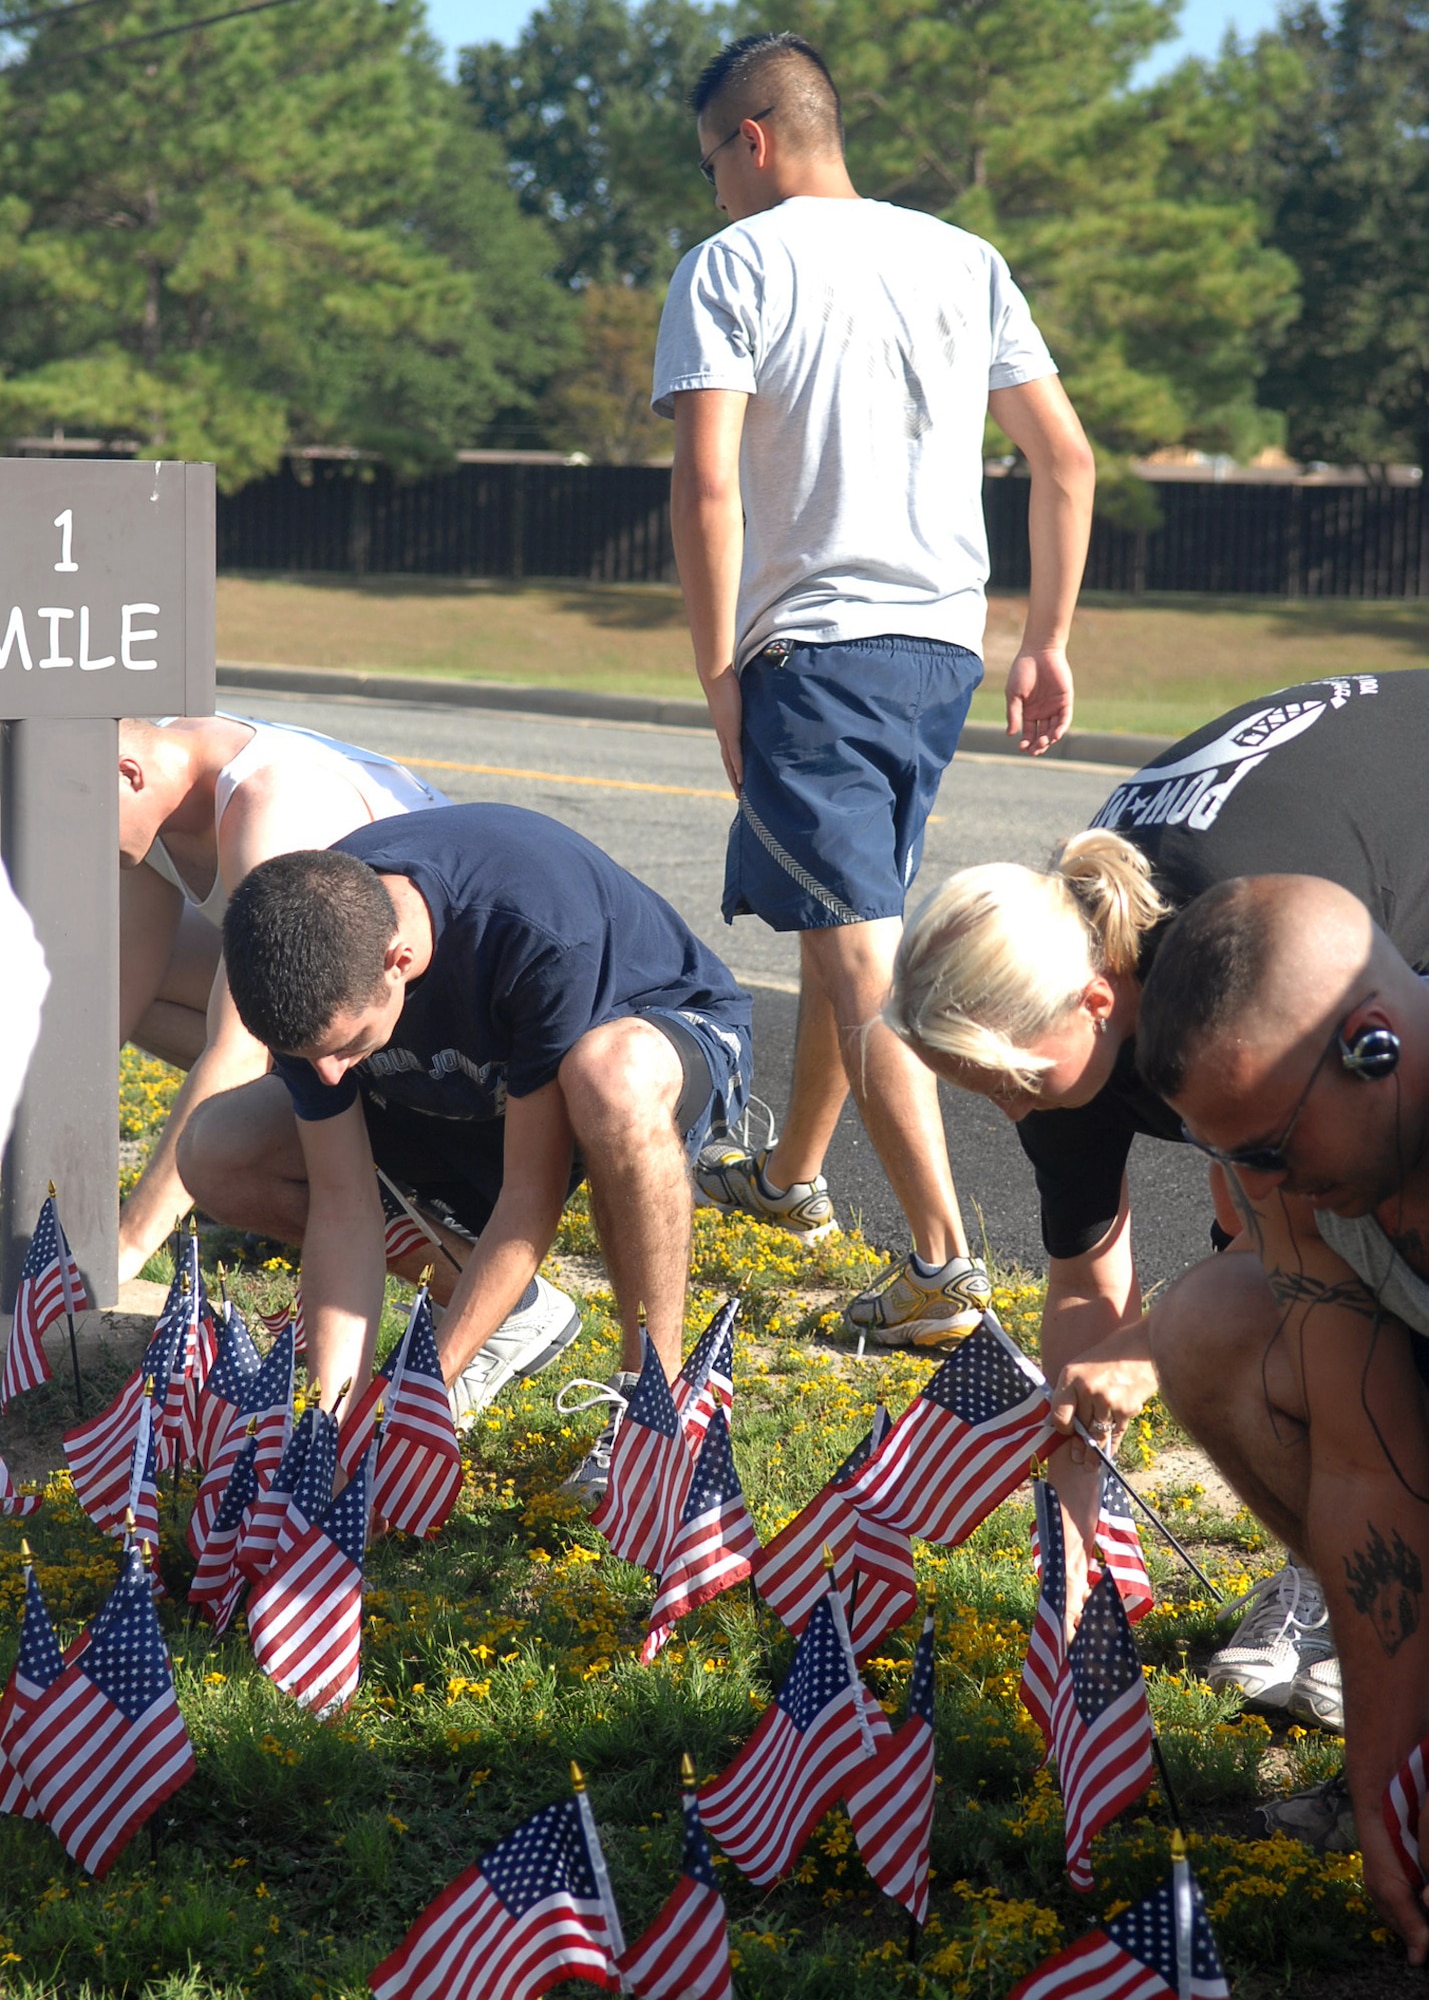 At the half-way mark of a two-mile run event called Run for the Fallen on Seymour Johnson Air Force Base, NC, runners each place an American flag in the ground. Participants planted flags at each mile marker to symbolize one military member who was killed in the War on Terror, August 24. (U.S. Air Force photo by Airman 1st Class Makenzie Lang)